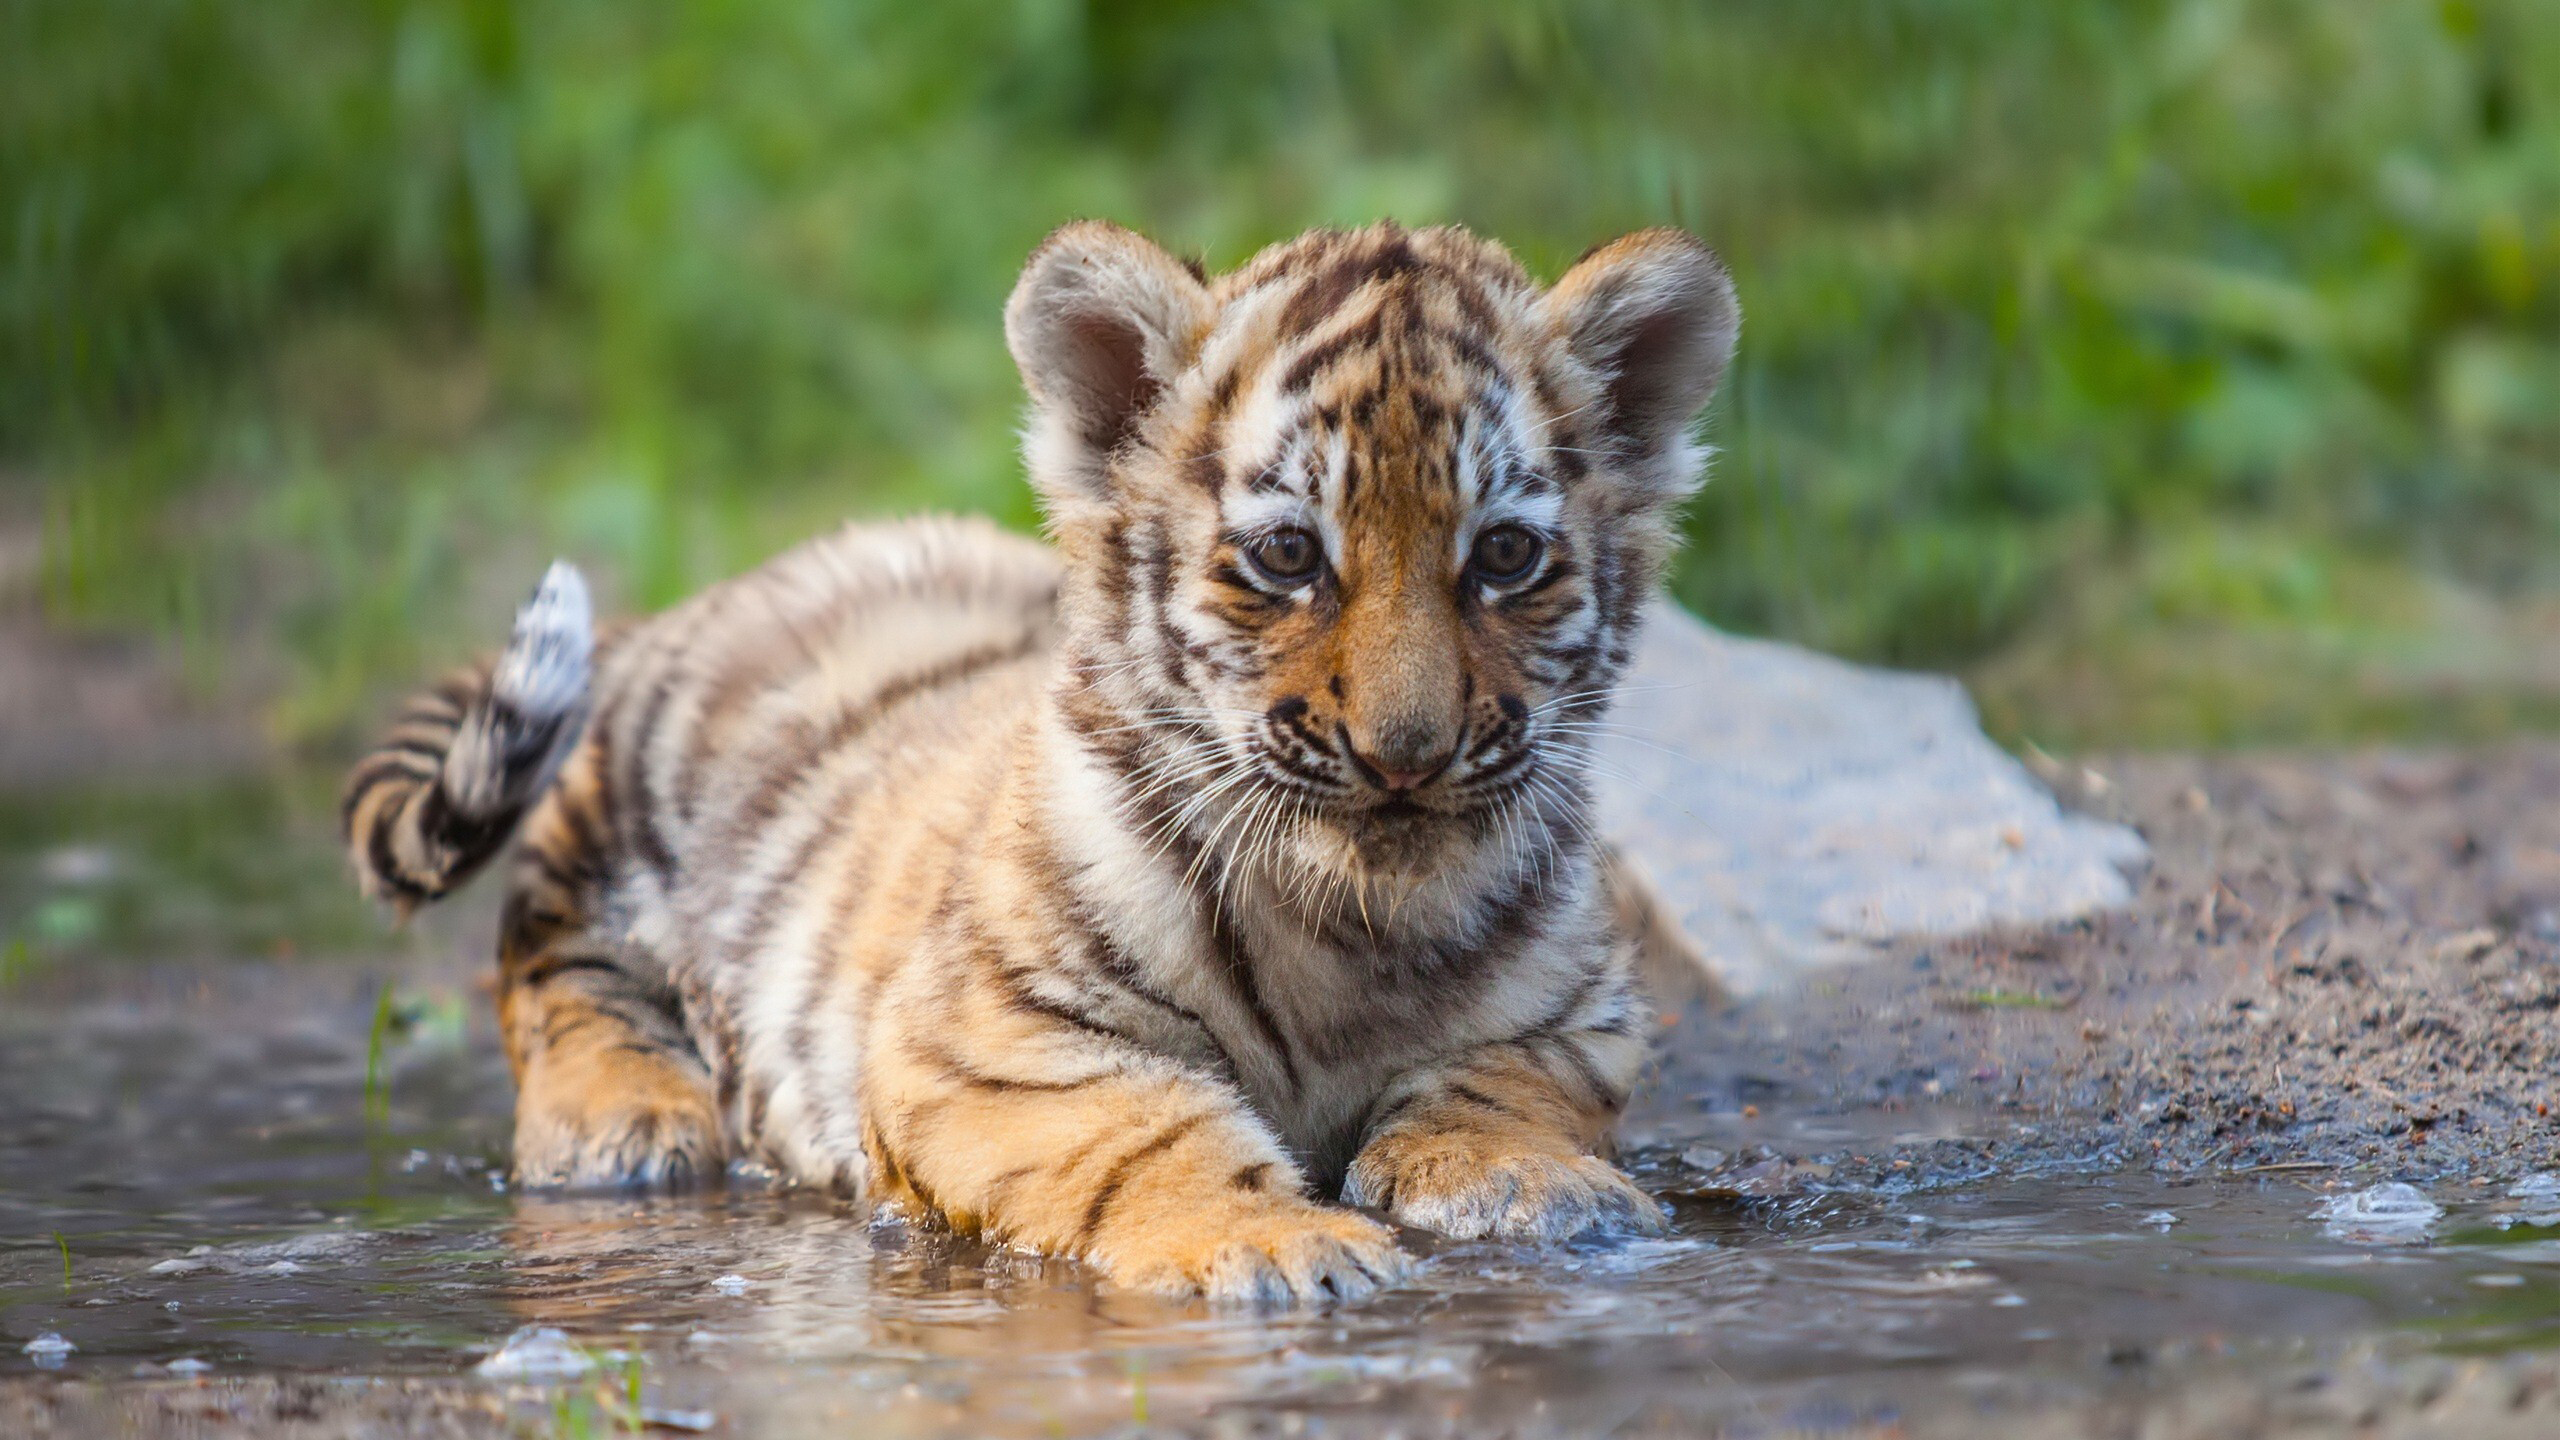 Charming Tiger Cub Is Sitting On Water 2K Tiger